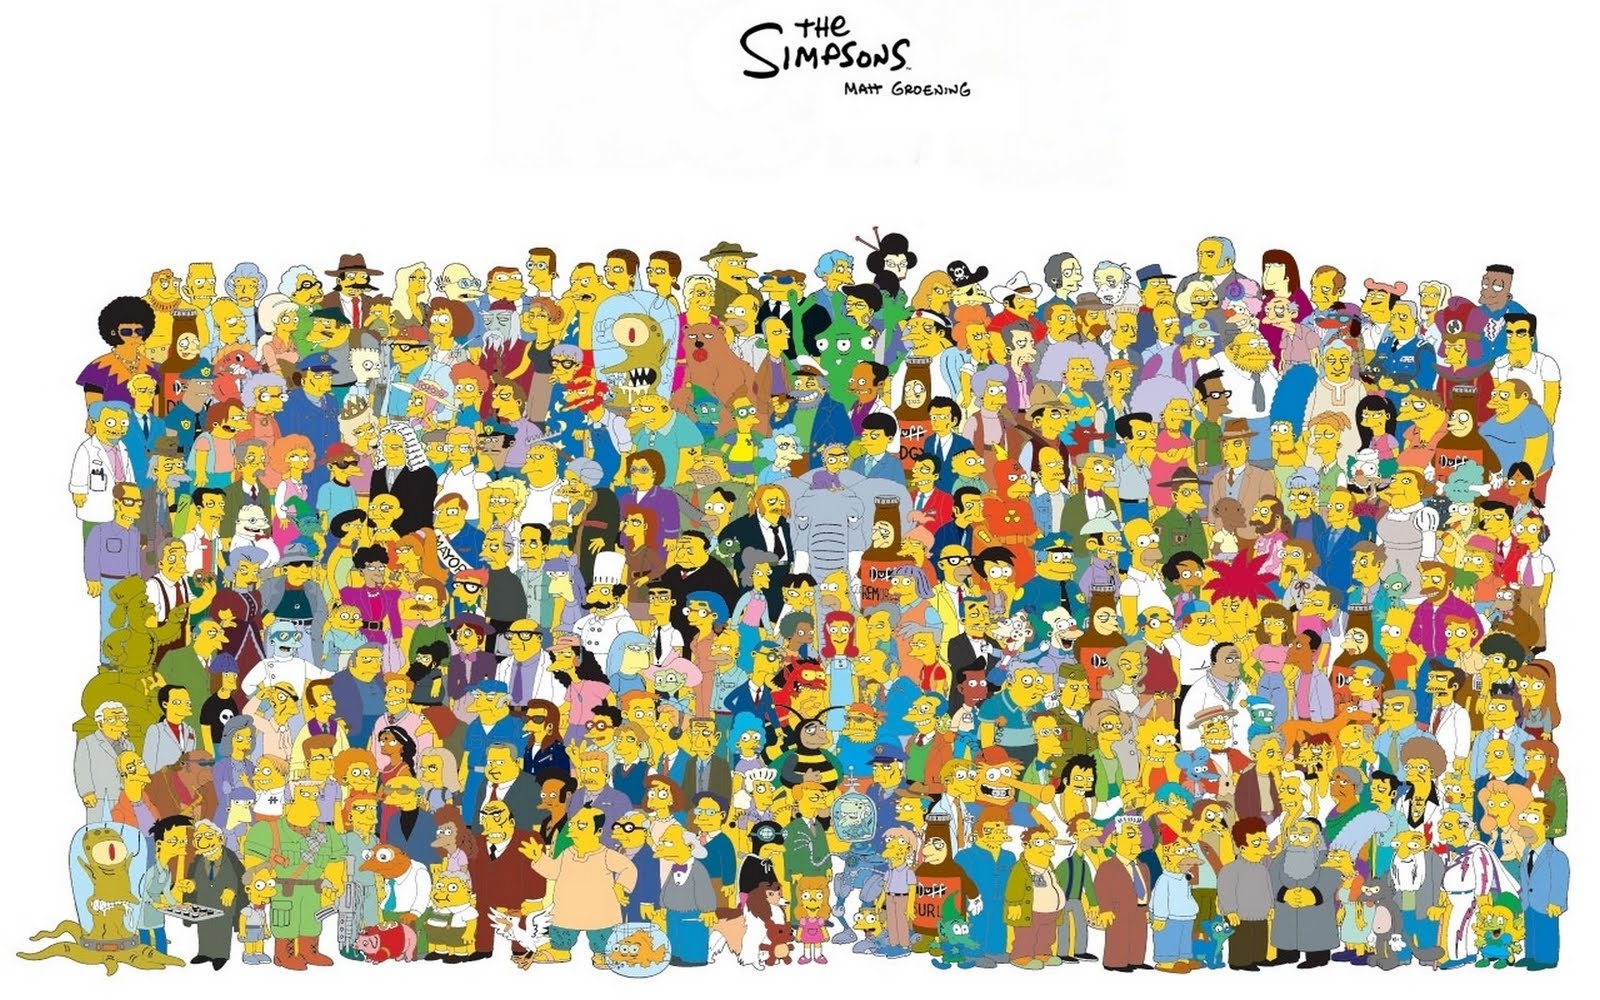 Free download Wallpapers Photo Art The Simpsons Wallpaper Simpsons